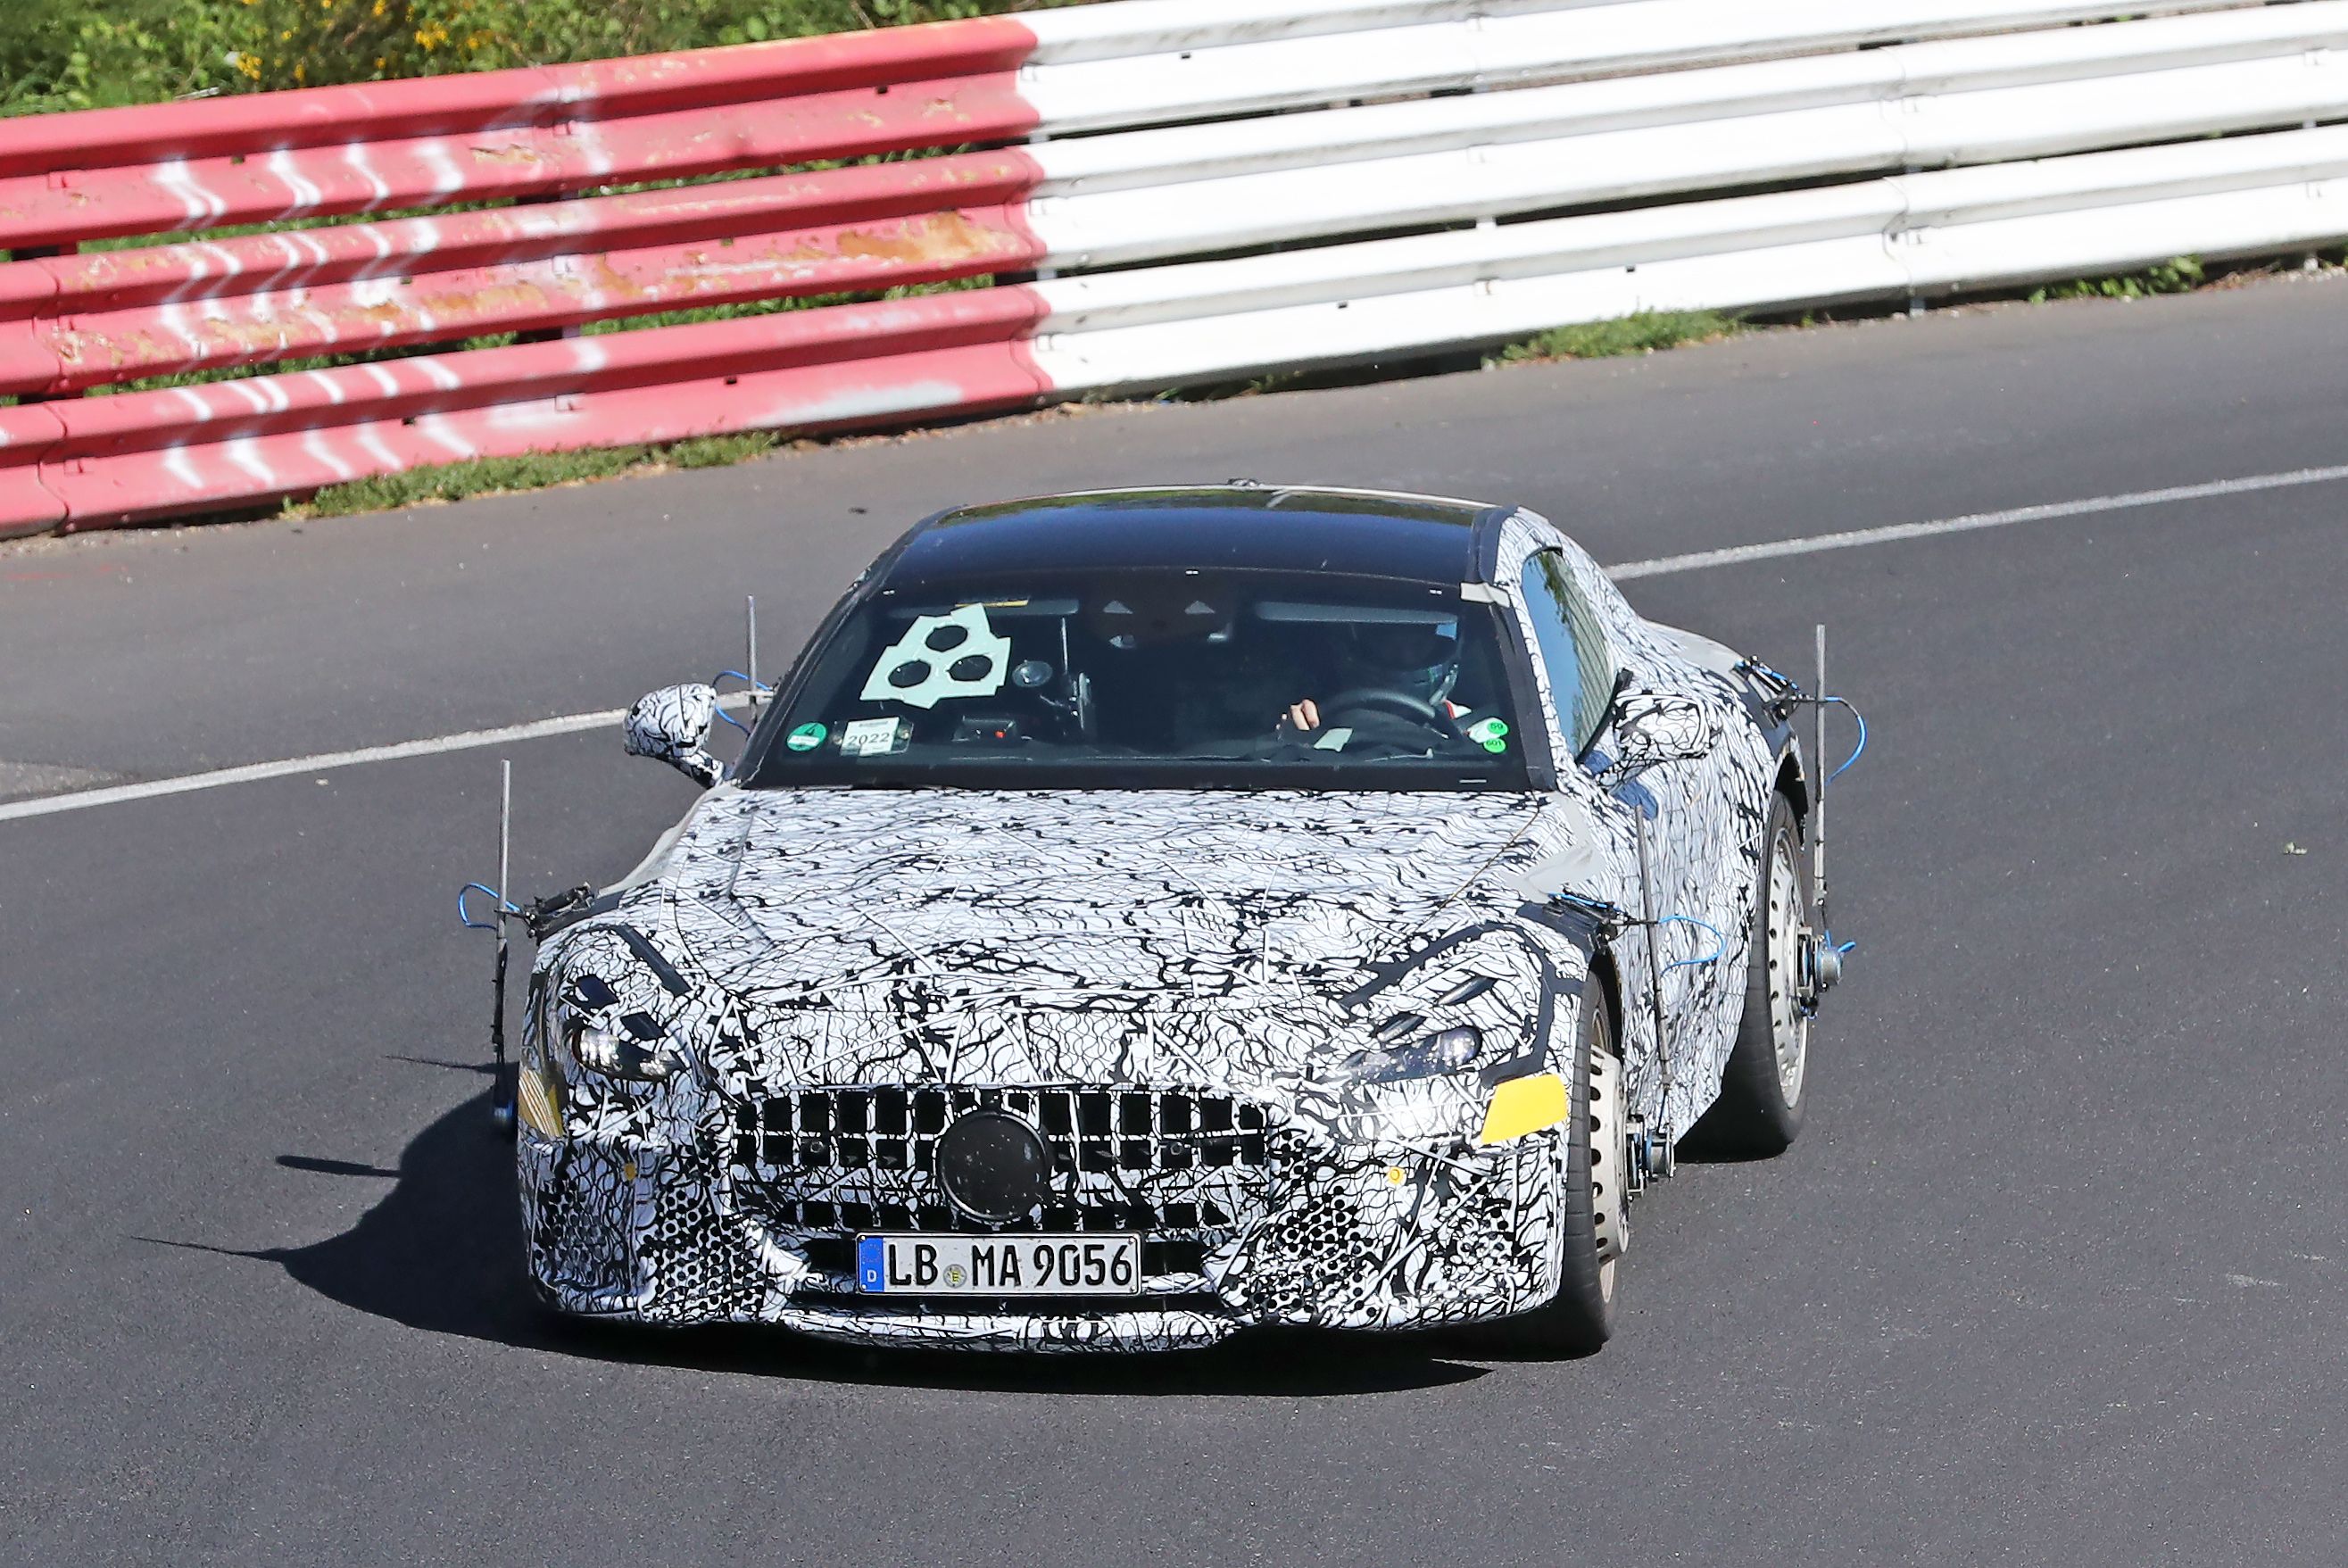 Spy Shots An Early Look at the 2024 MercedesAMG GT EPerformance PHEV